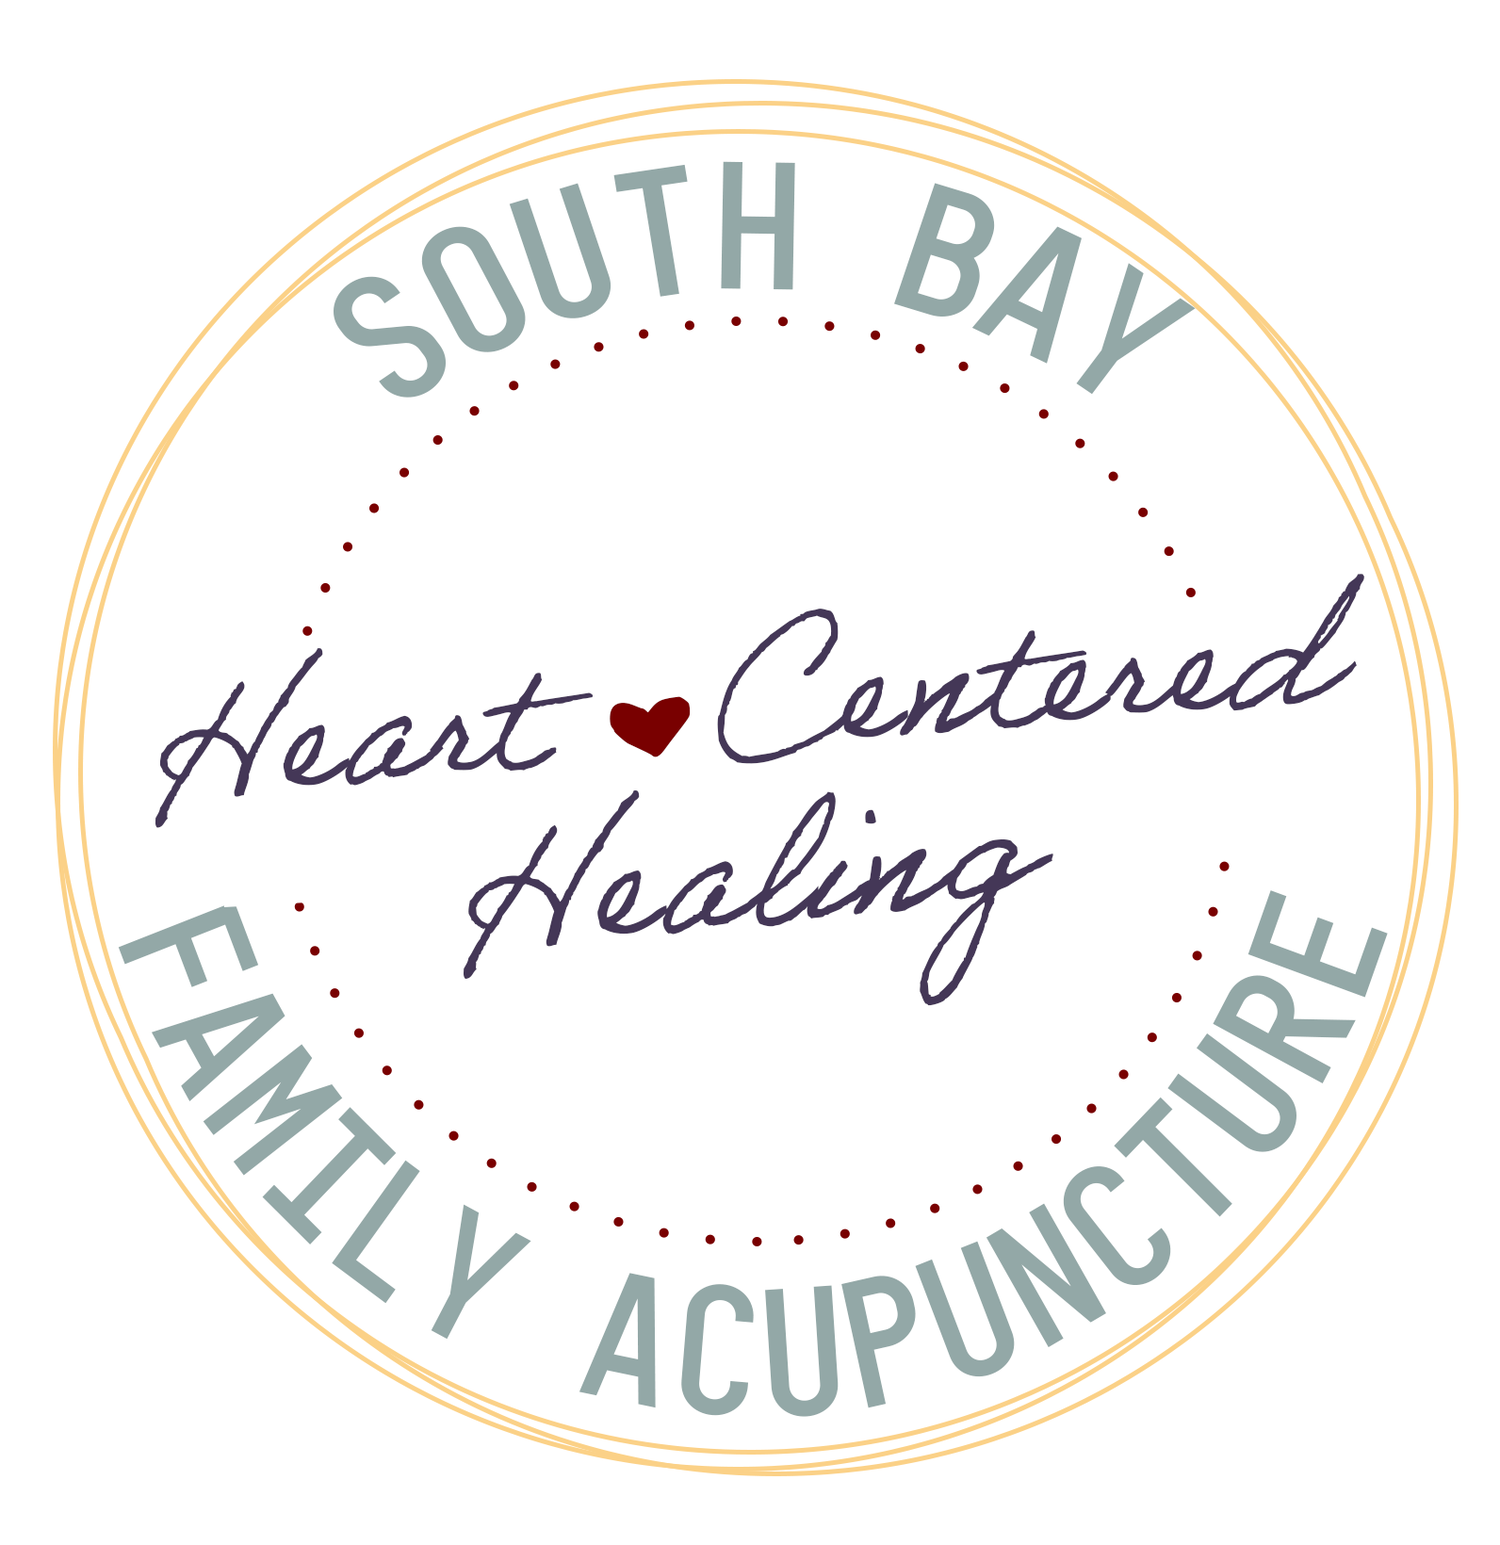 South Bay Family Acupuncture